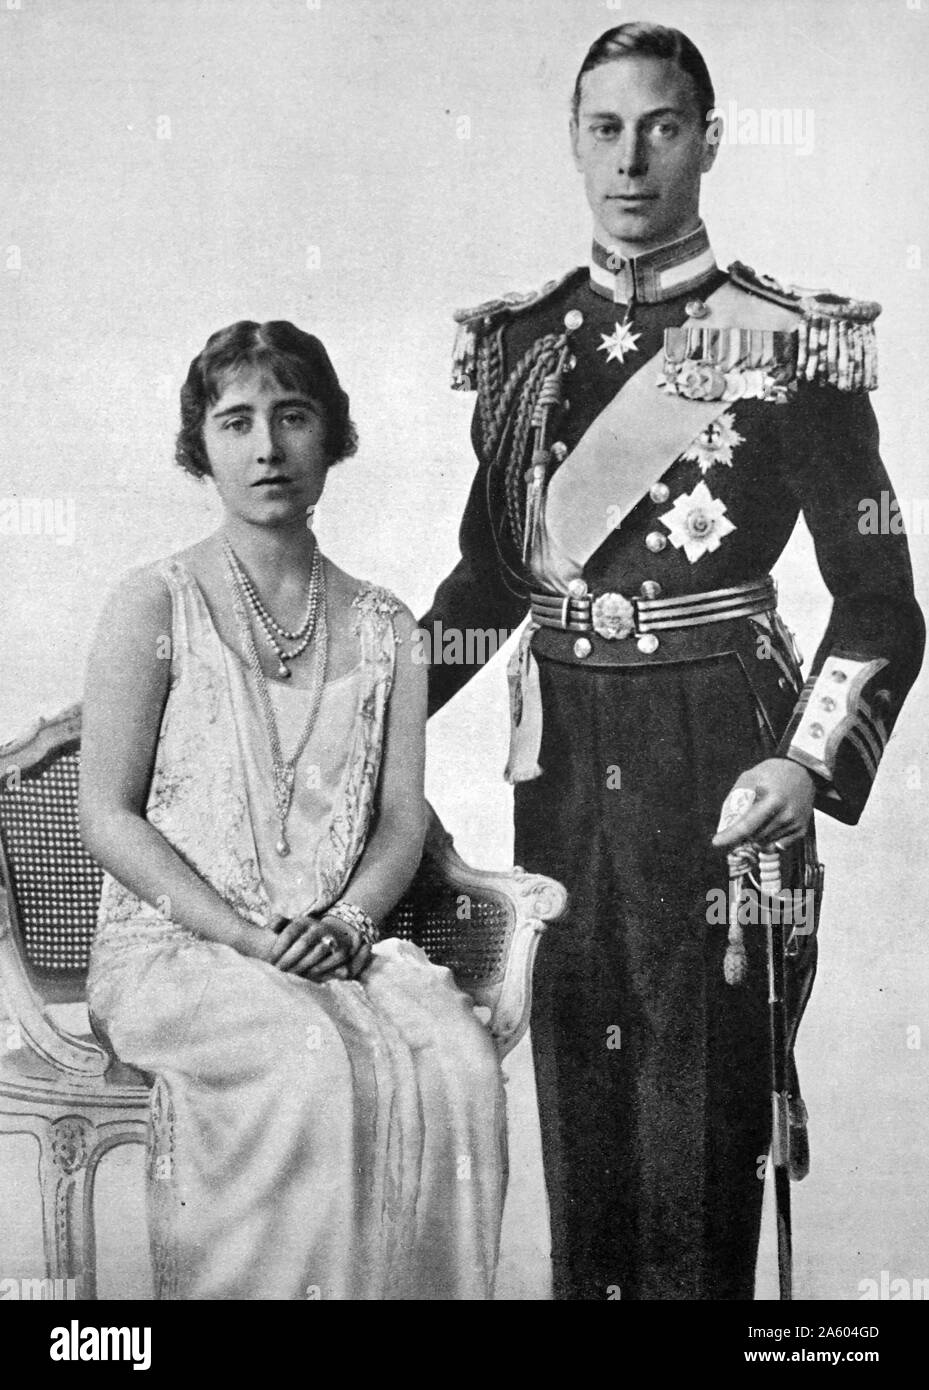 Photograph of the recently engaged Prince Albert Frederick Arthur George (1895-1952) and Lady Elizabeth Bowes-Lyon (1900-2002) in full dress for the King and Queen of Rumania's visit to the England. Dated 20th Century Stock Photo